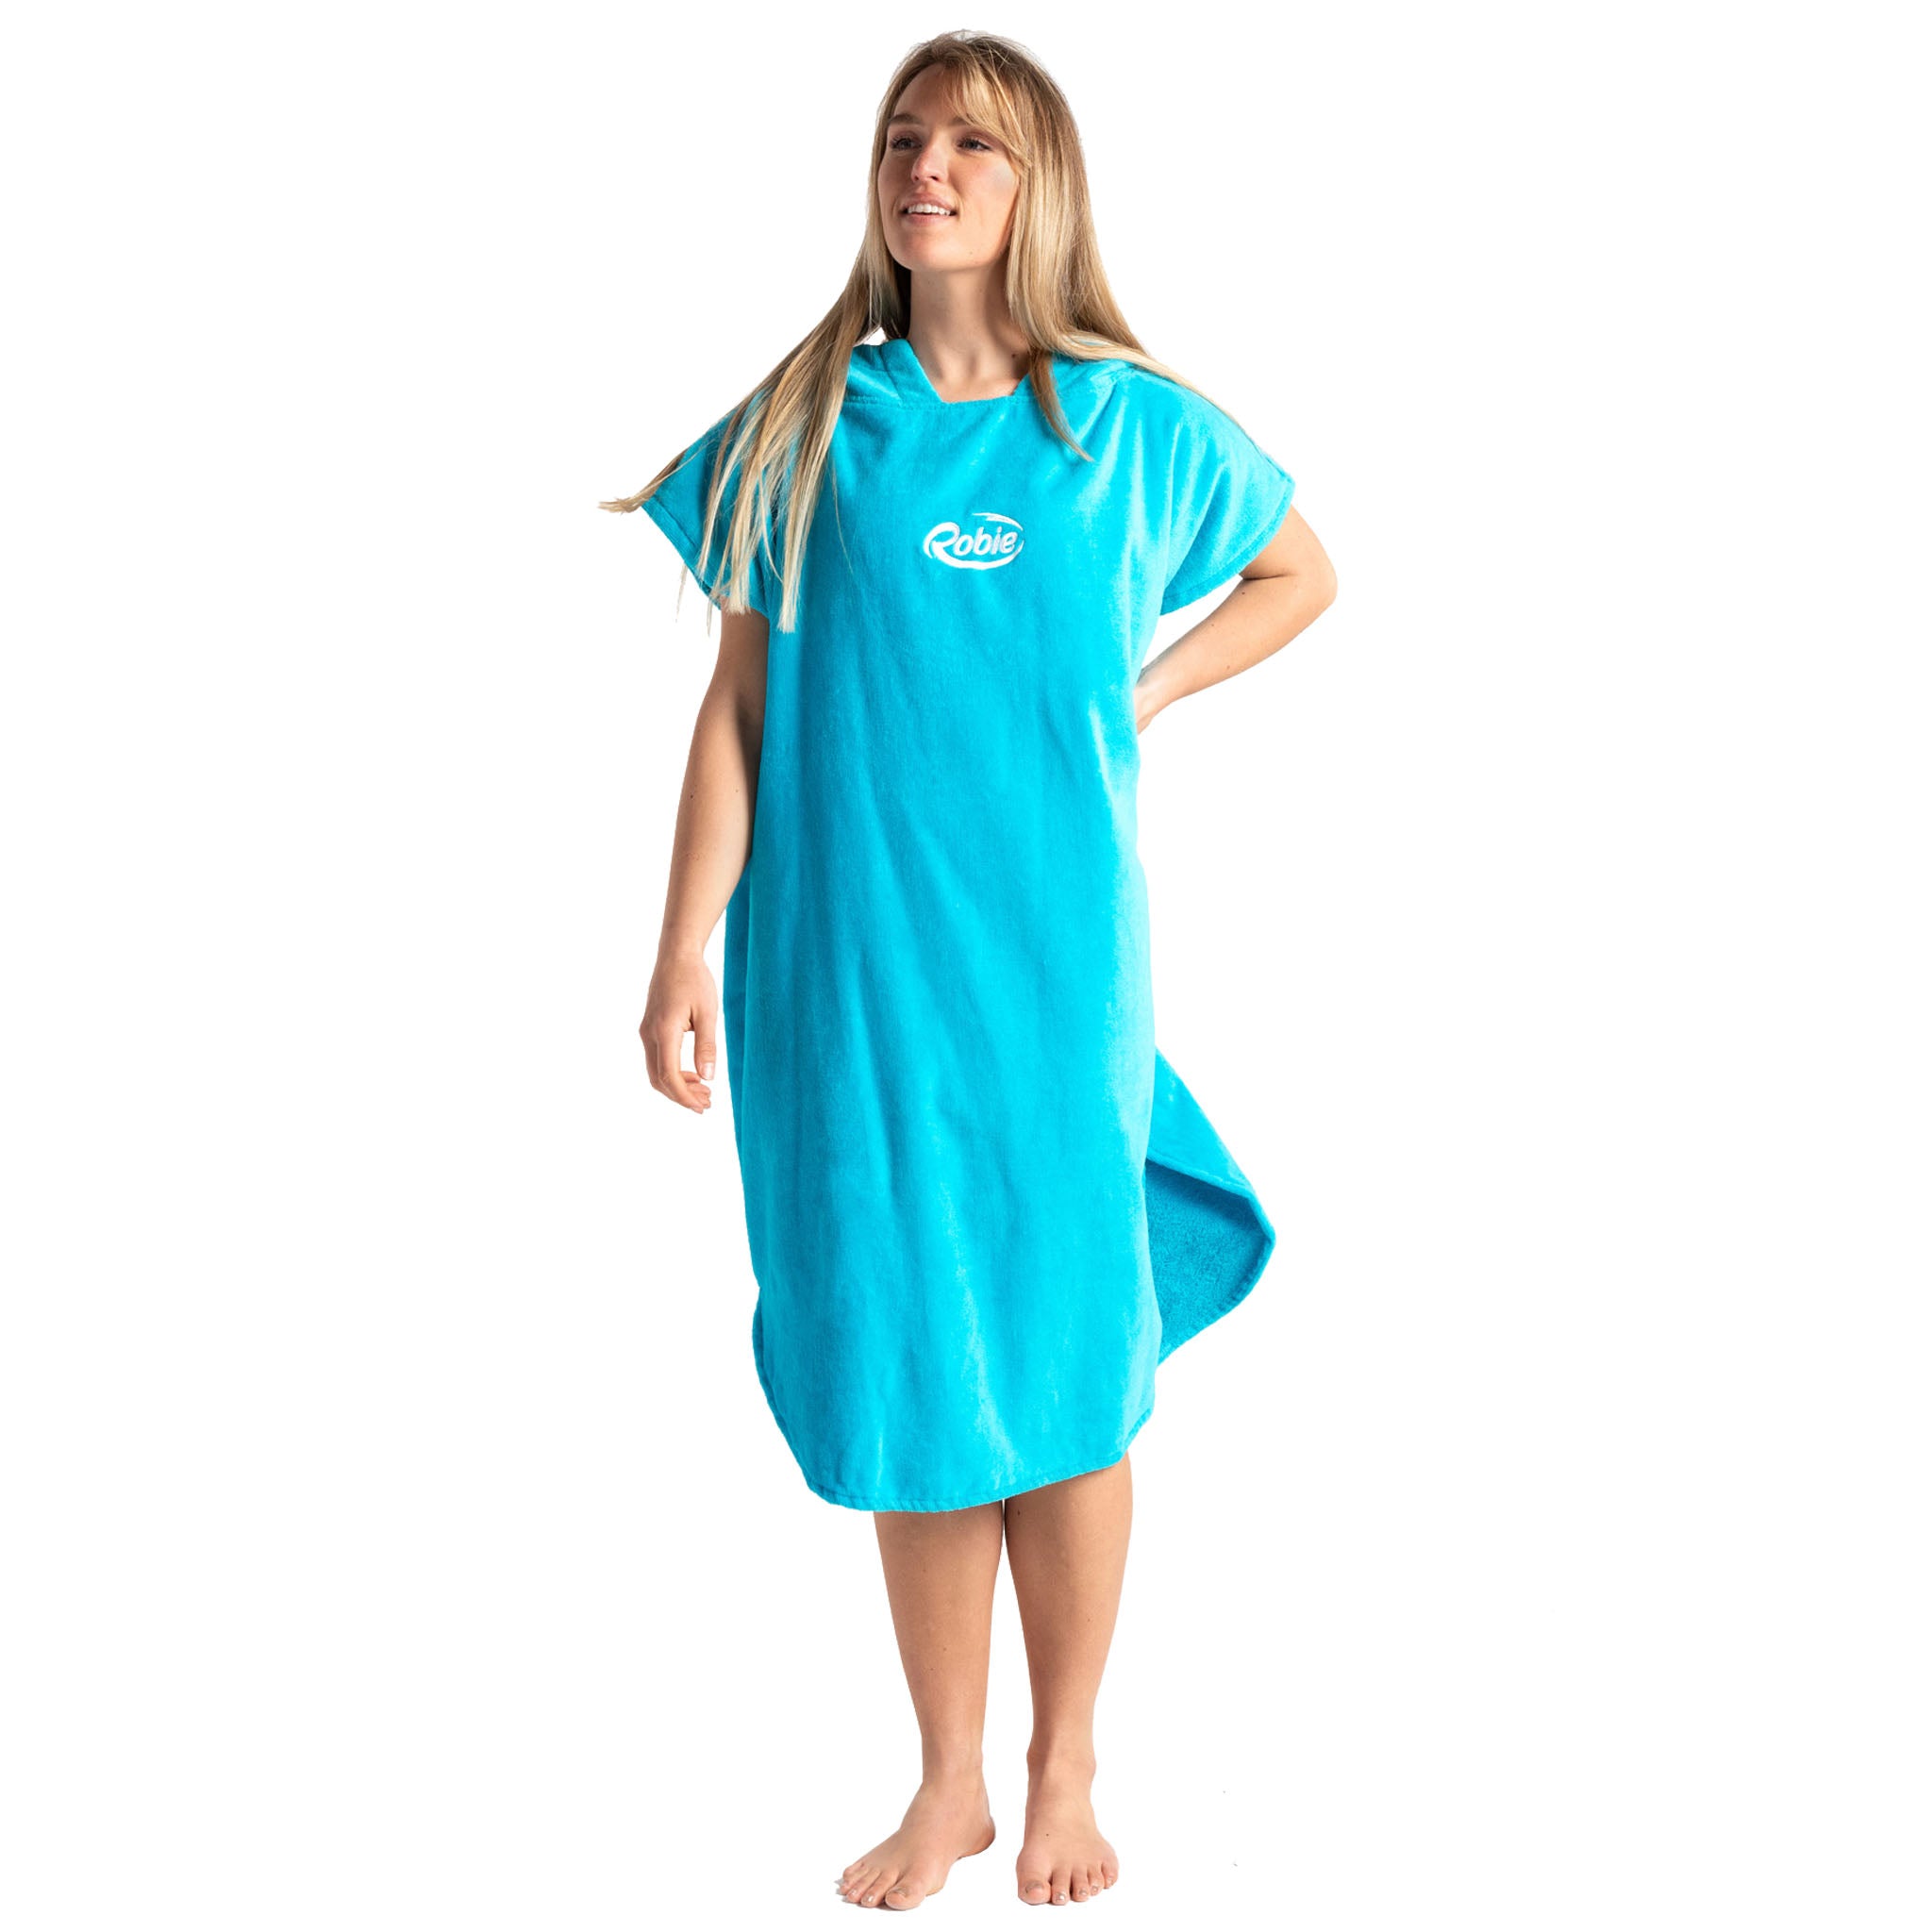 Robie Robes Original Towelling Beach Changing Robe Poncho - Blue Atoll